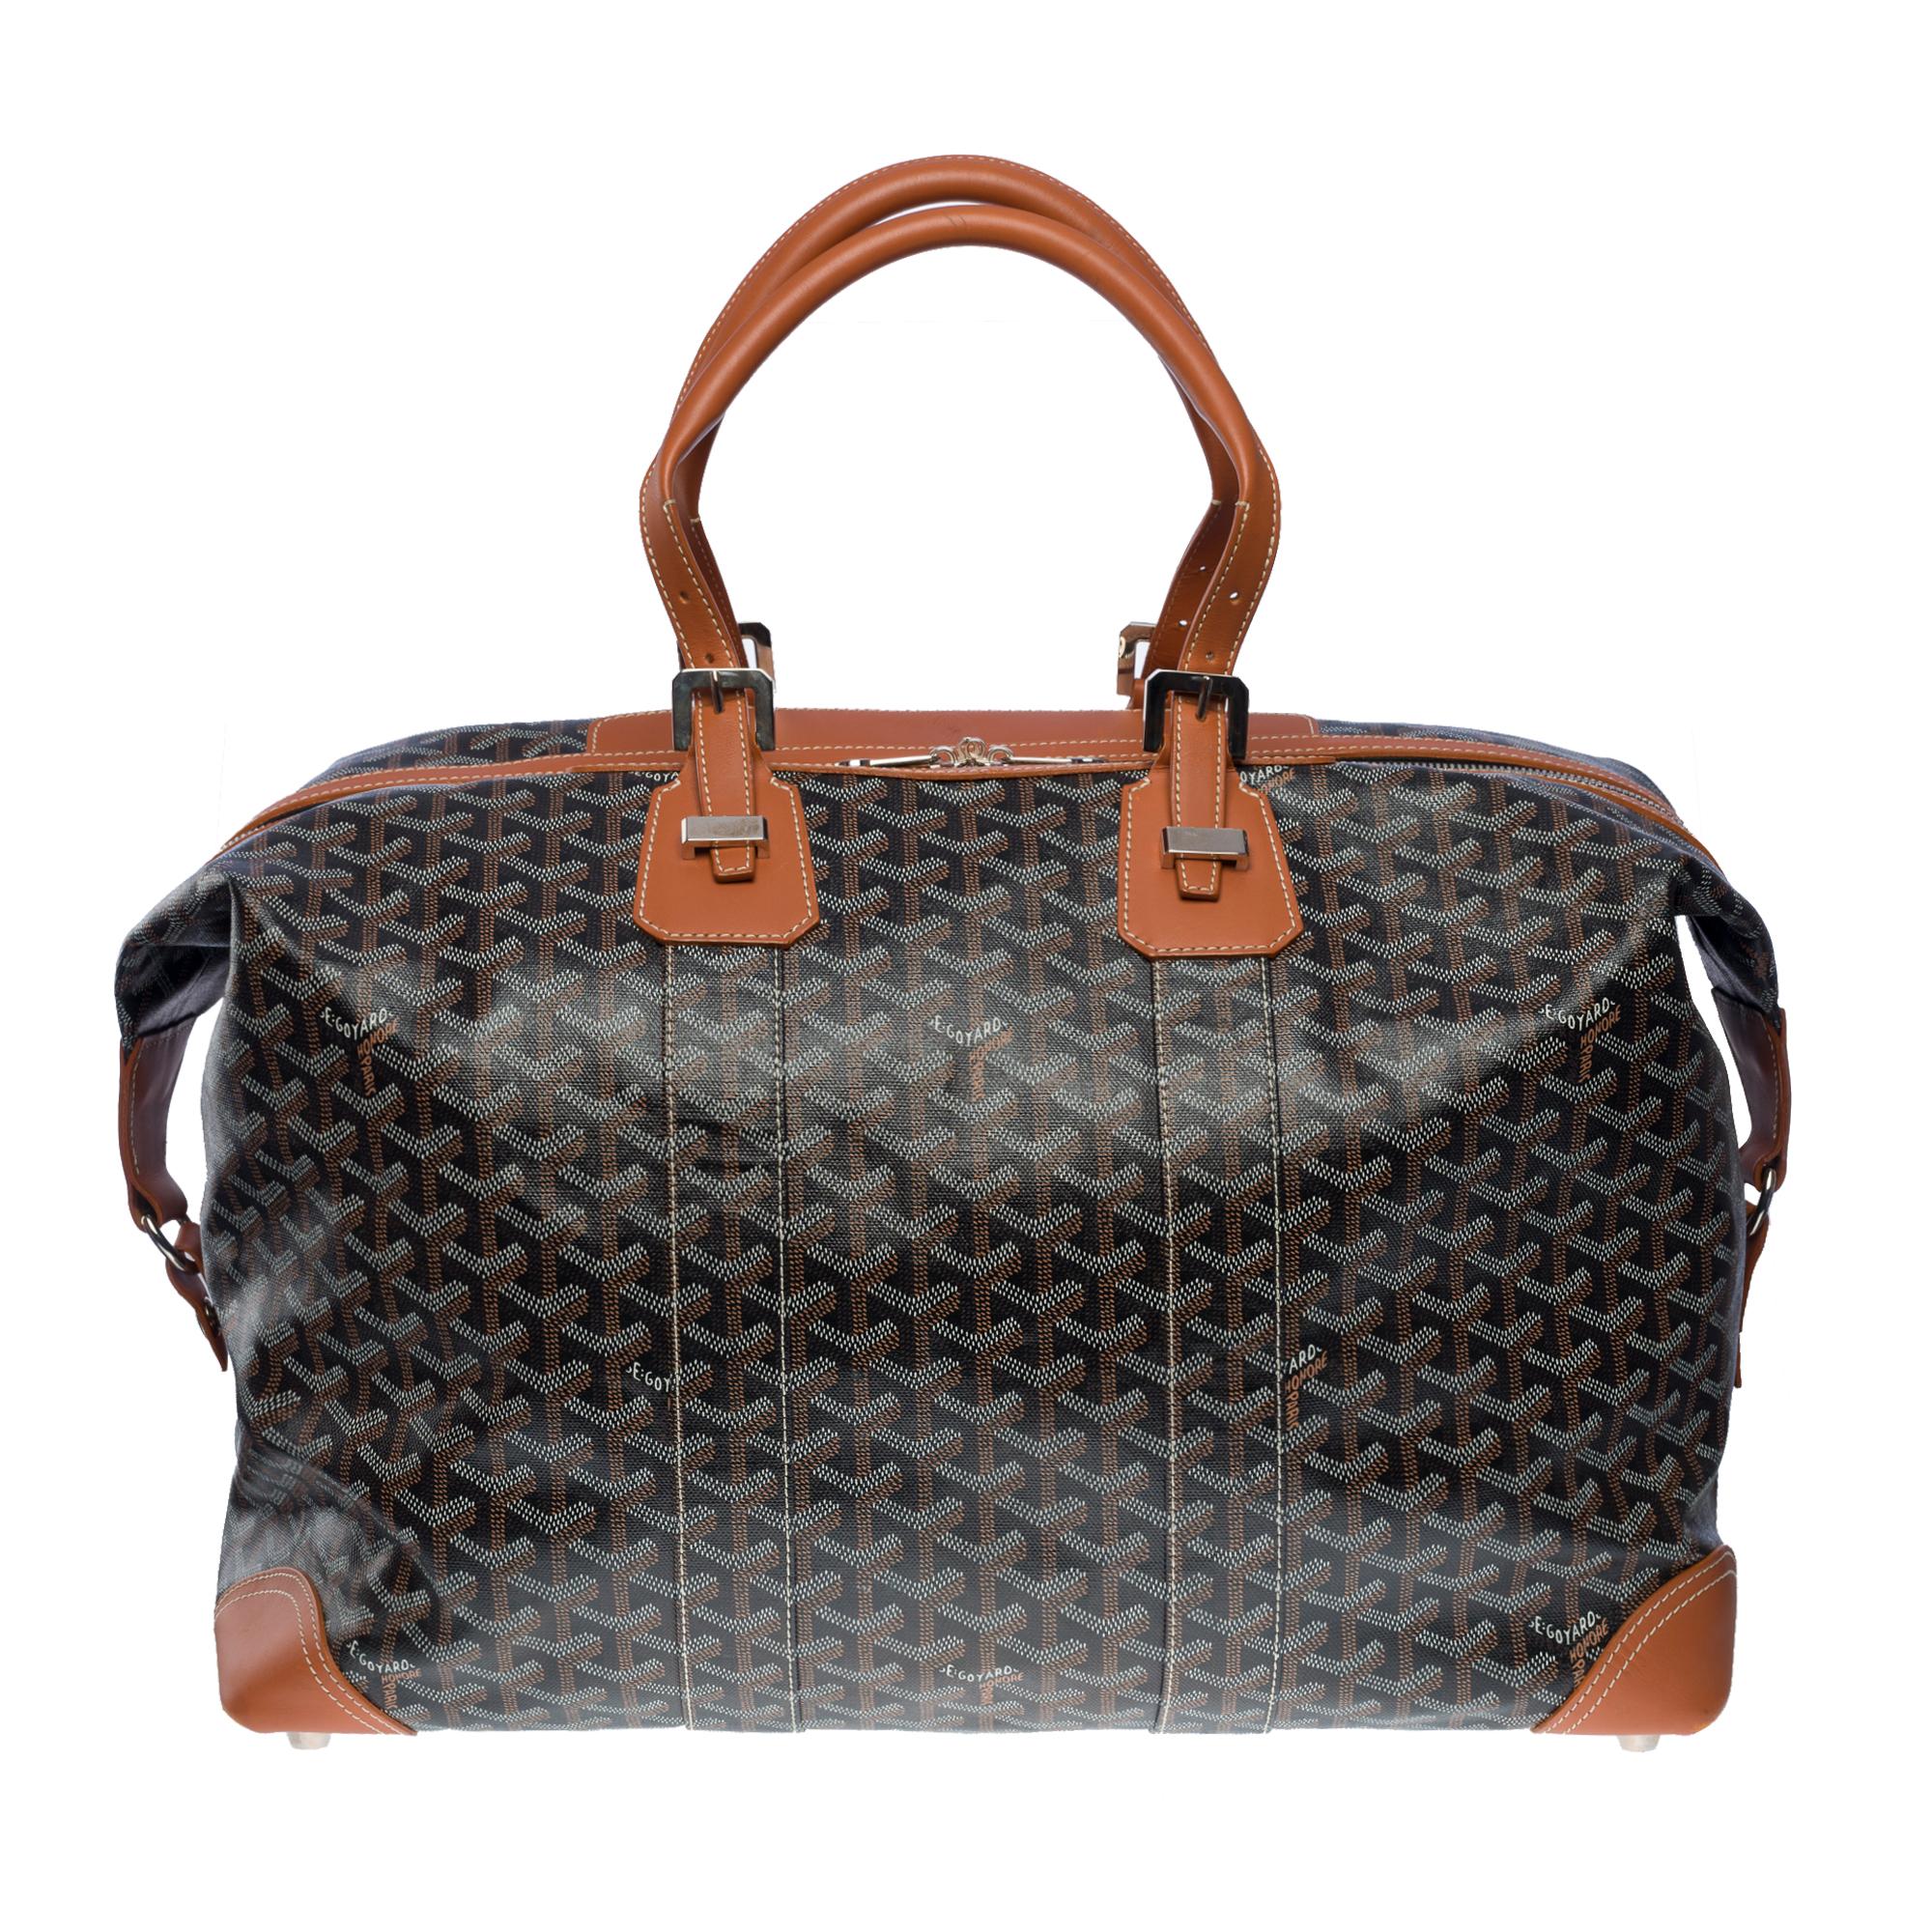 Elegant Goyard Boeing 45 travel bag in black and brown Goyardine canvas and beige leather, silver metal hardware, double handle in beige leather allowing a hand-carried

Zip closure
A front patch pocket
Yellow canvas lining, one zippered